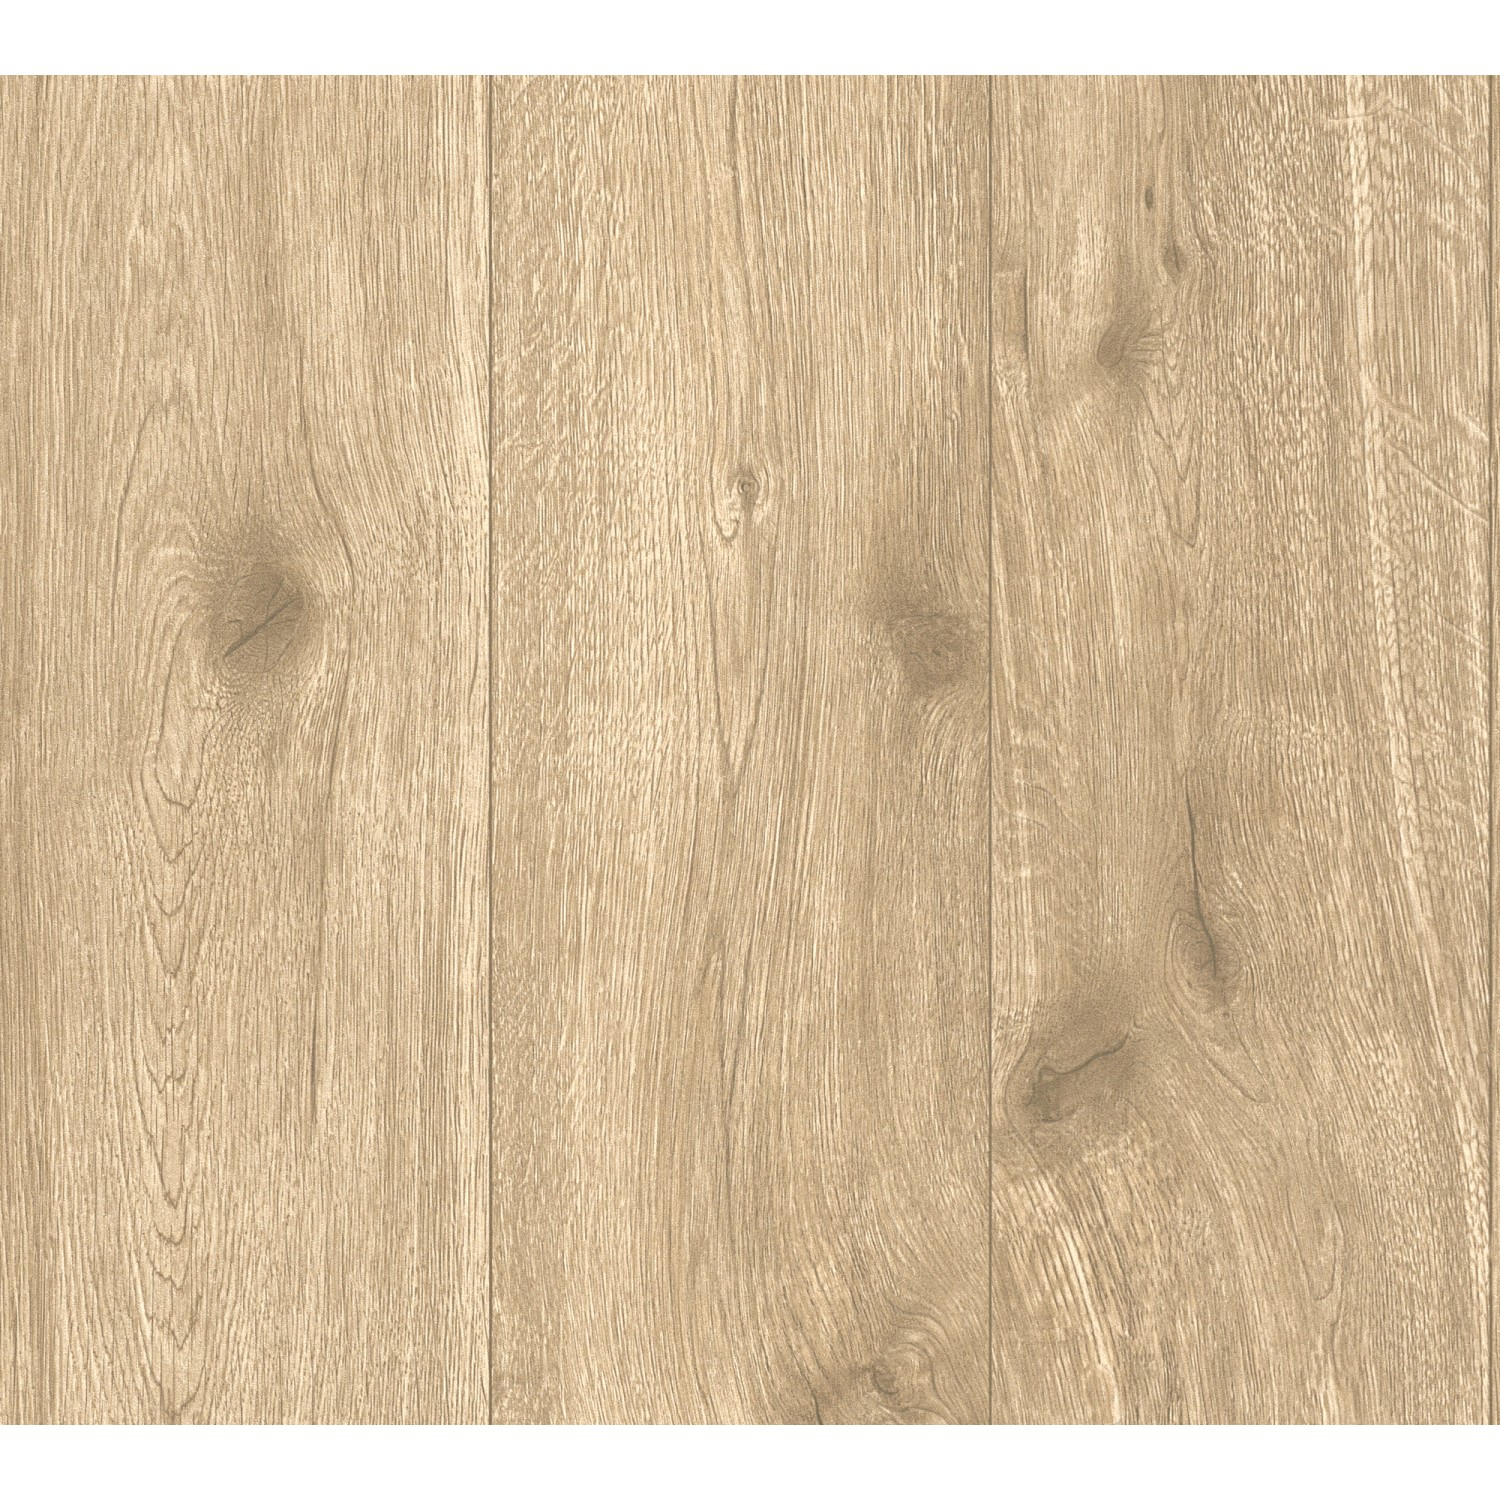 A.S. Création Vliestapete Best of Wood´n Stone Holz Eiche hell FSC® von AS-Creation